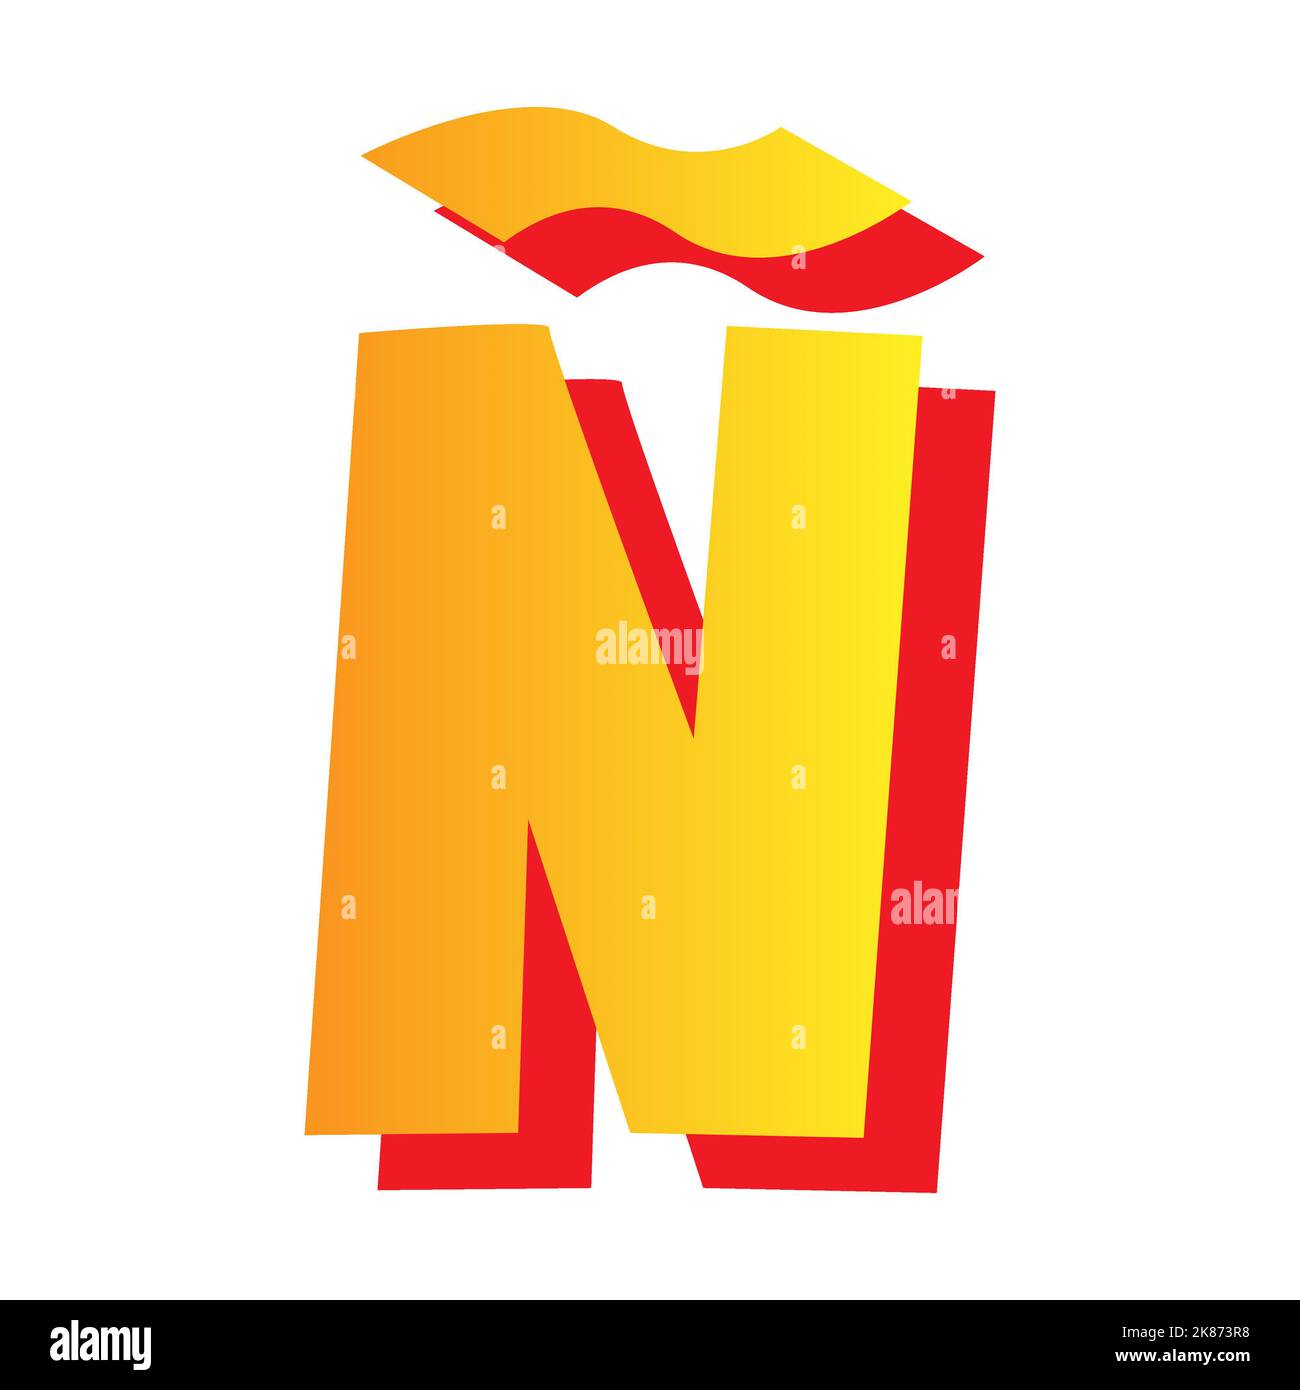 Letter n spanish, comic style typeface with transparent background Stock Photo